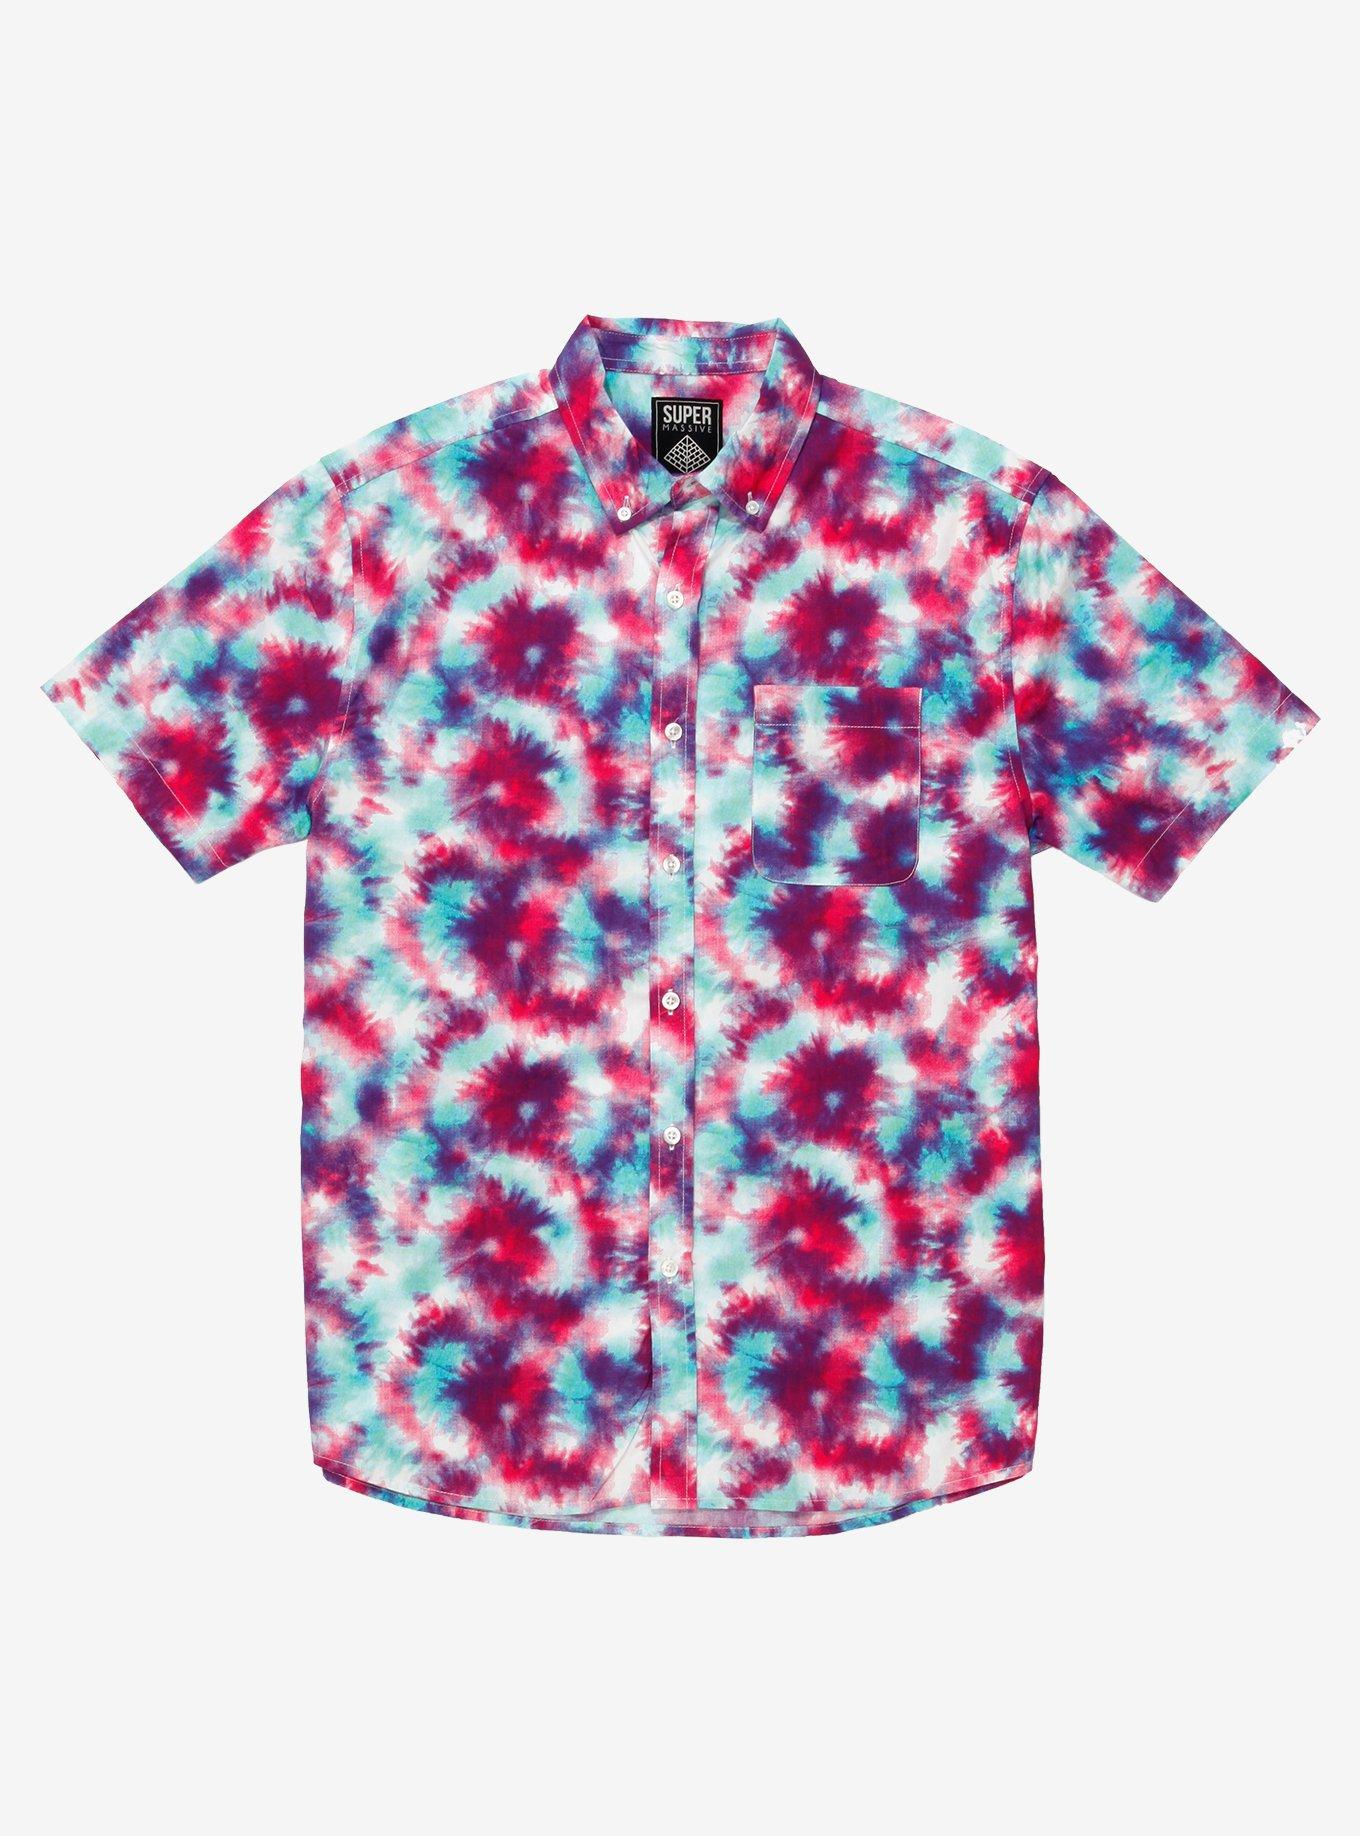 Green & Pink Tie-Dye Woven Button-Up, ABSTRACT, hi-res